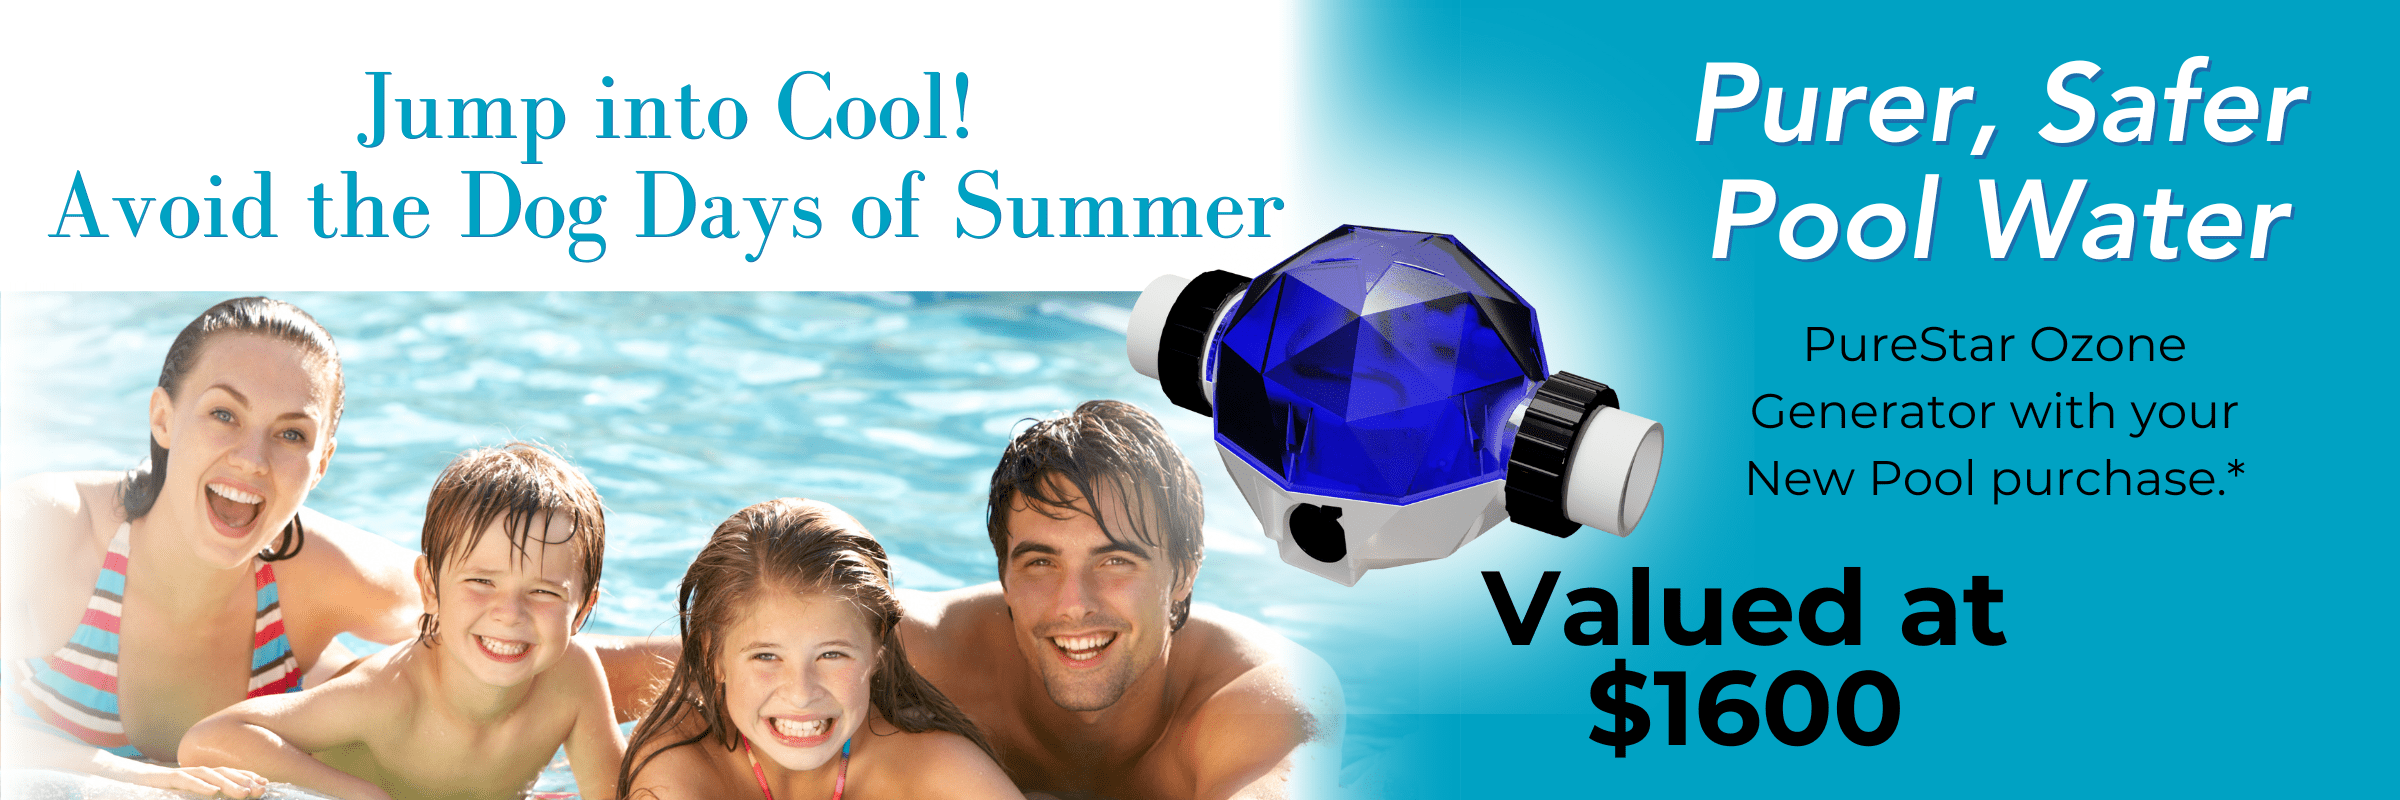 Jump Into Cool! Avoid the dog days of summer!